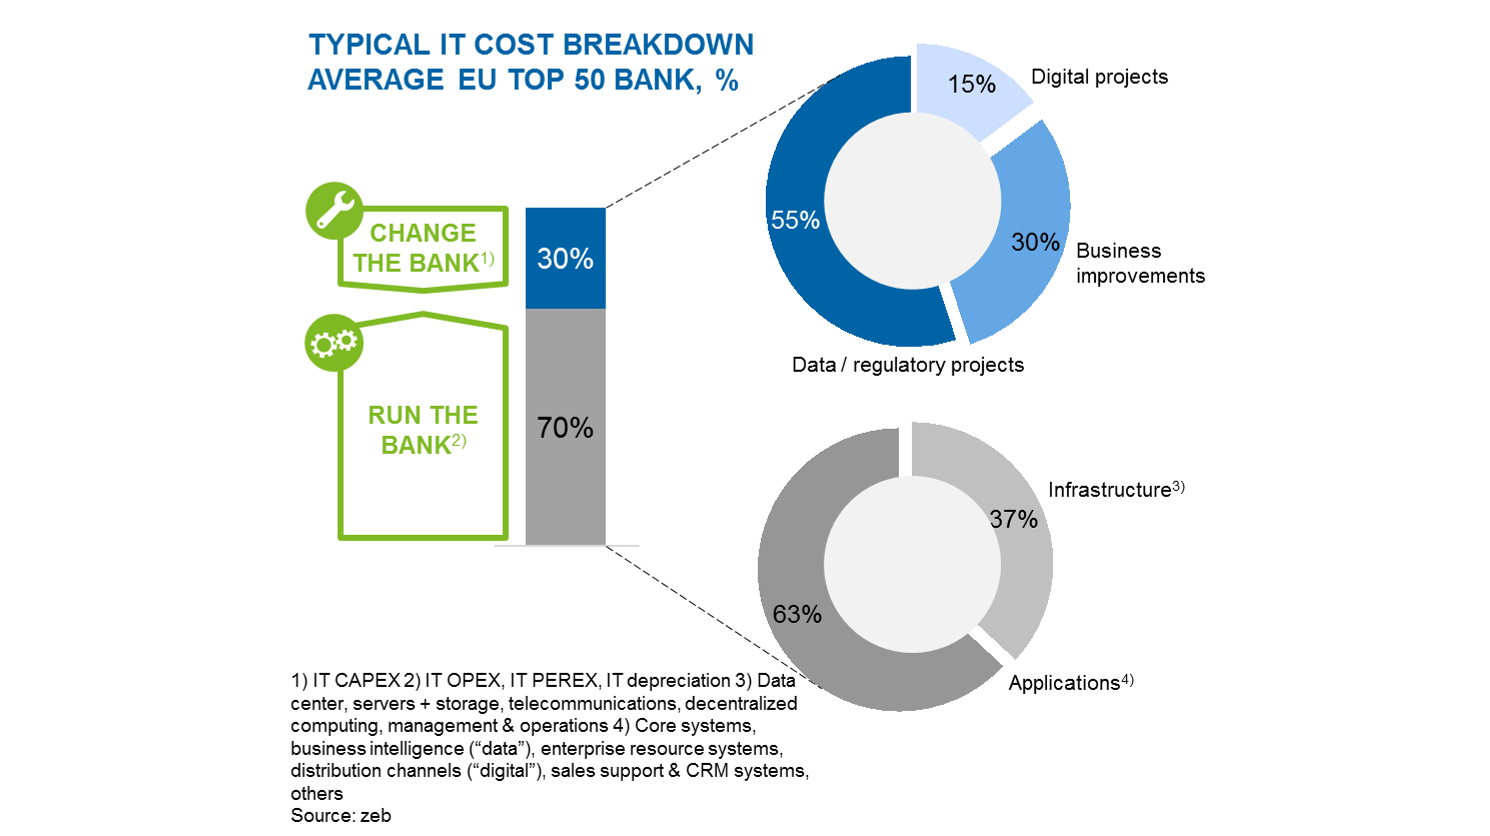 Typical IT costs breakdown of an average EU top 50 bank